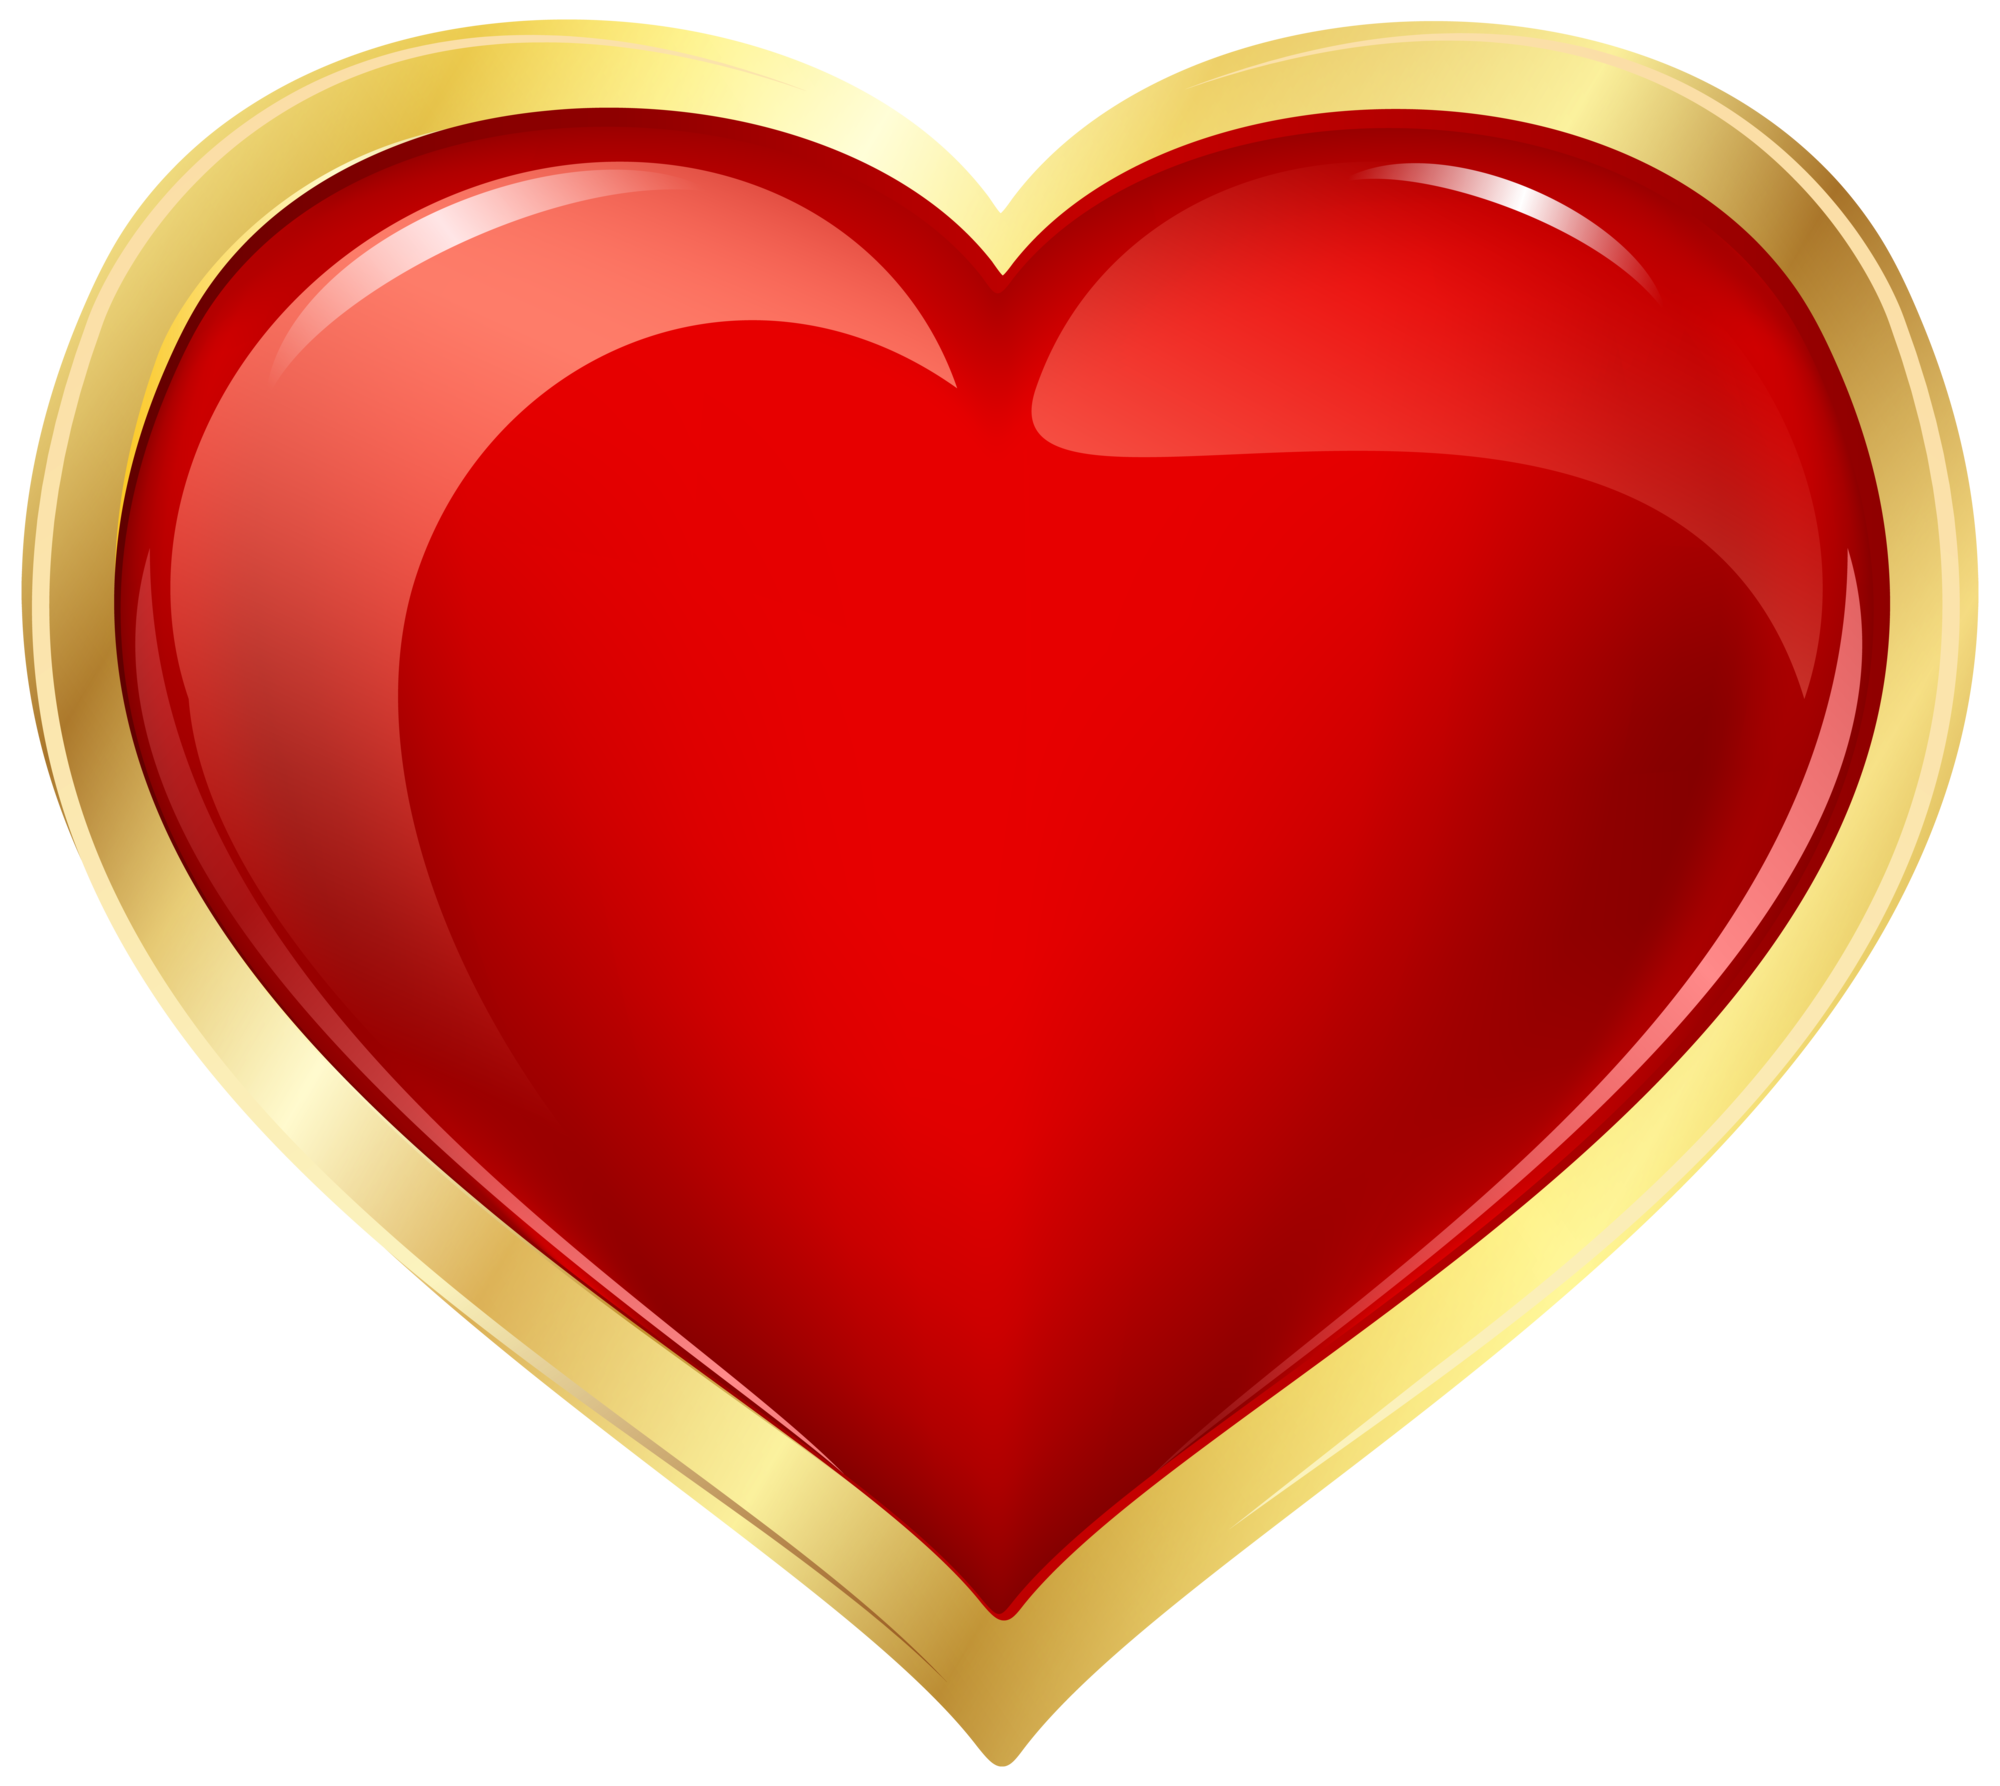 Red and Gold Heart Clip Art Image